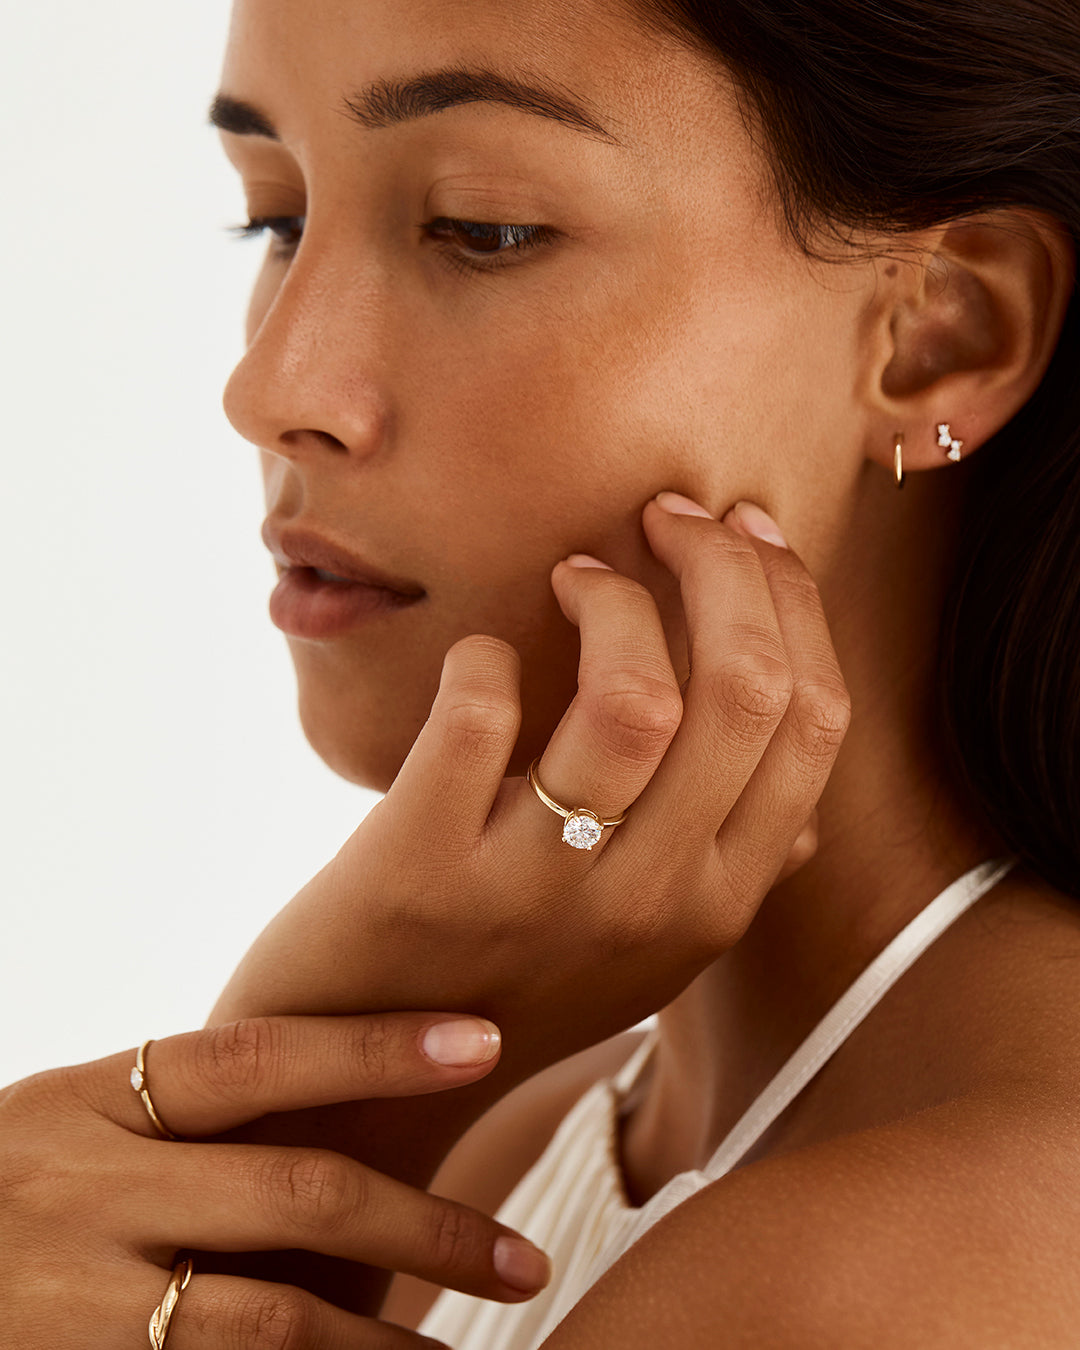 A model wears a round solitaire engagement ring with a laboratory grown diamond